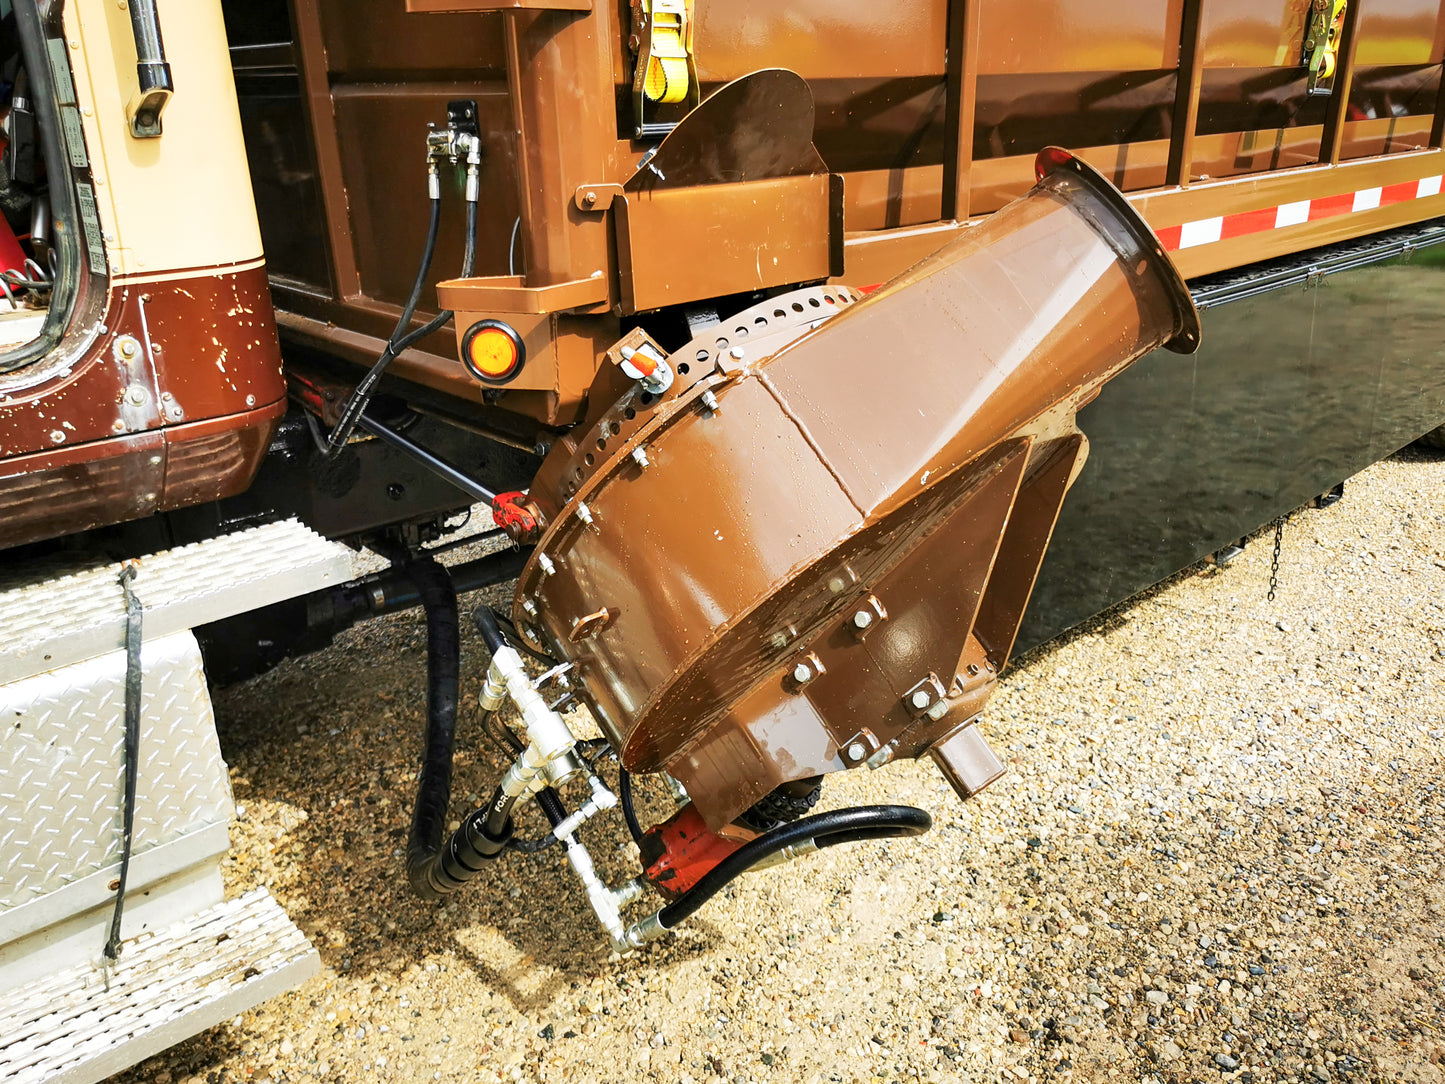 Truck Mounted Wood Chip Container and Blower